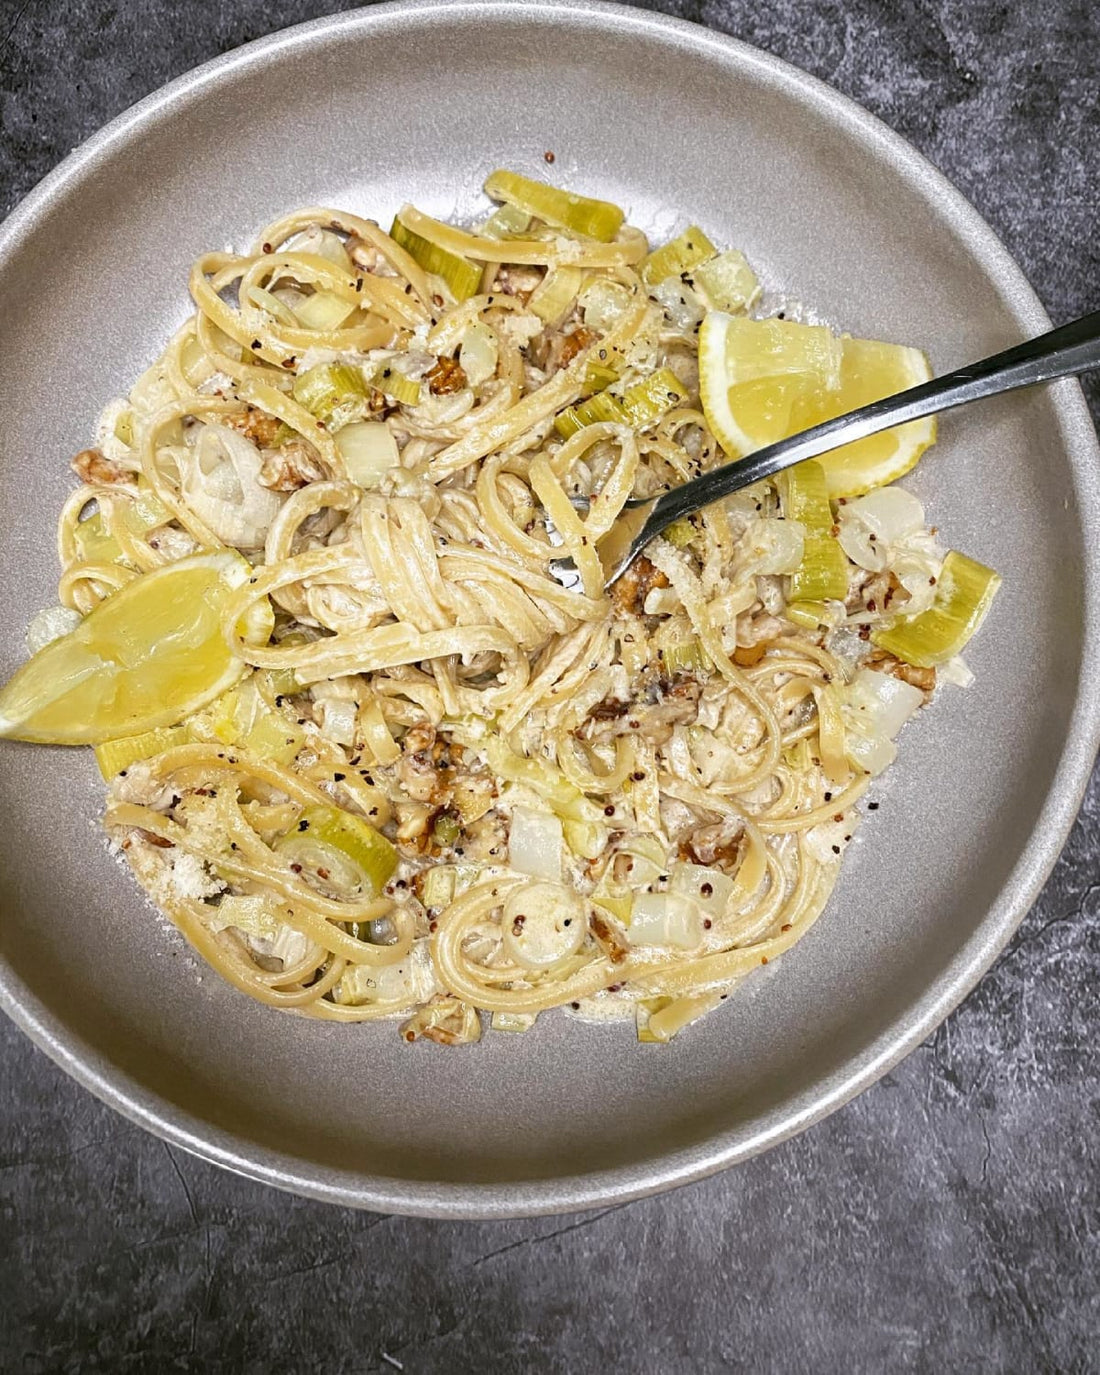 Creamy Leek Pasta with Walnuts and Parmesan